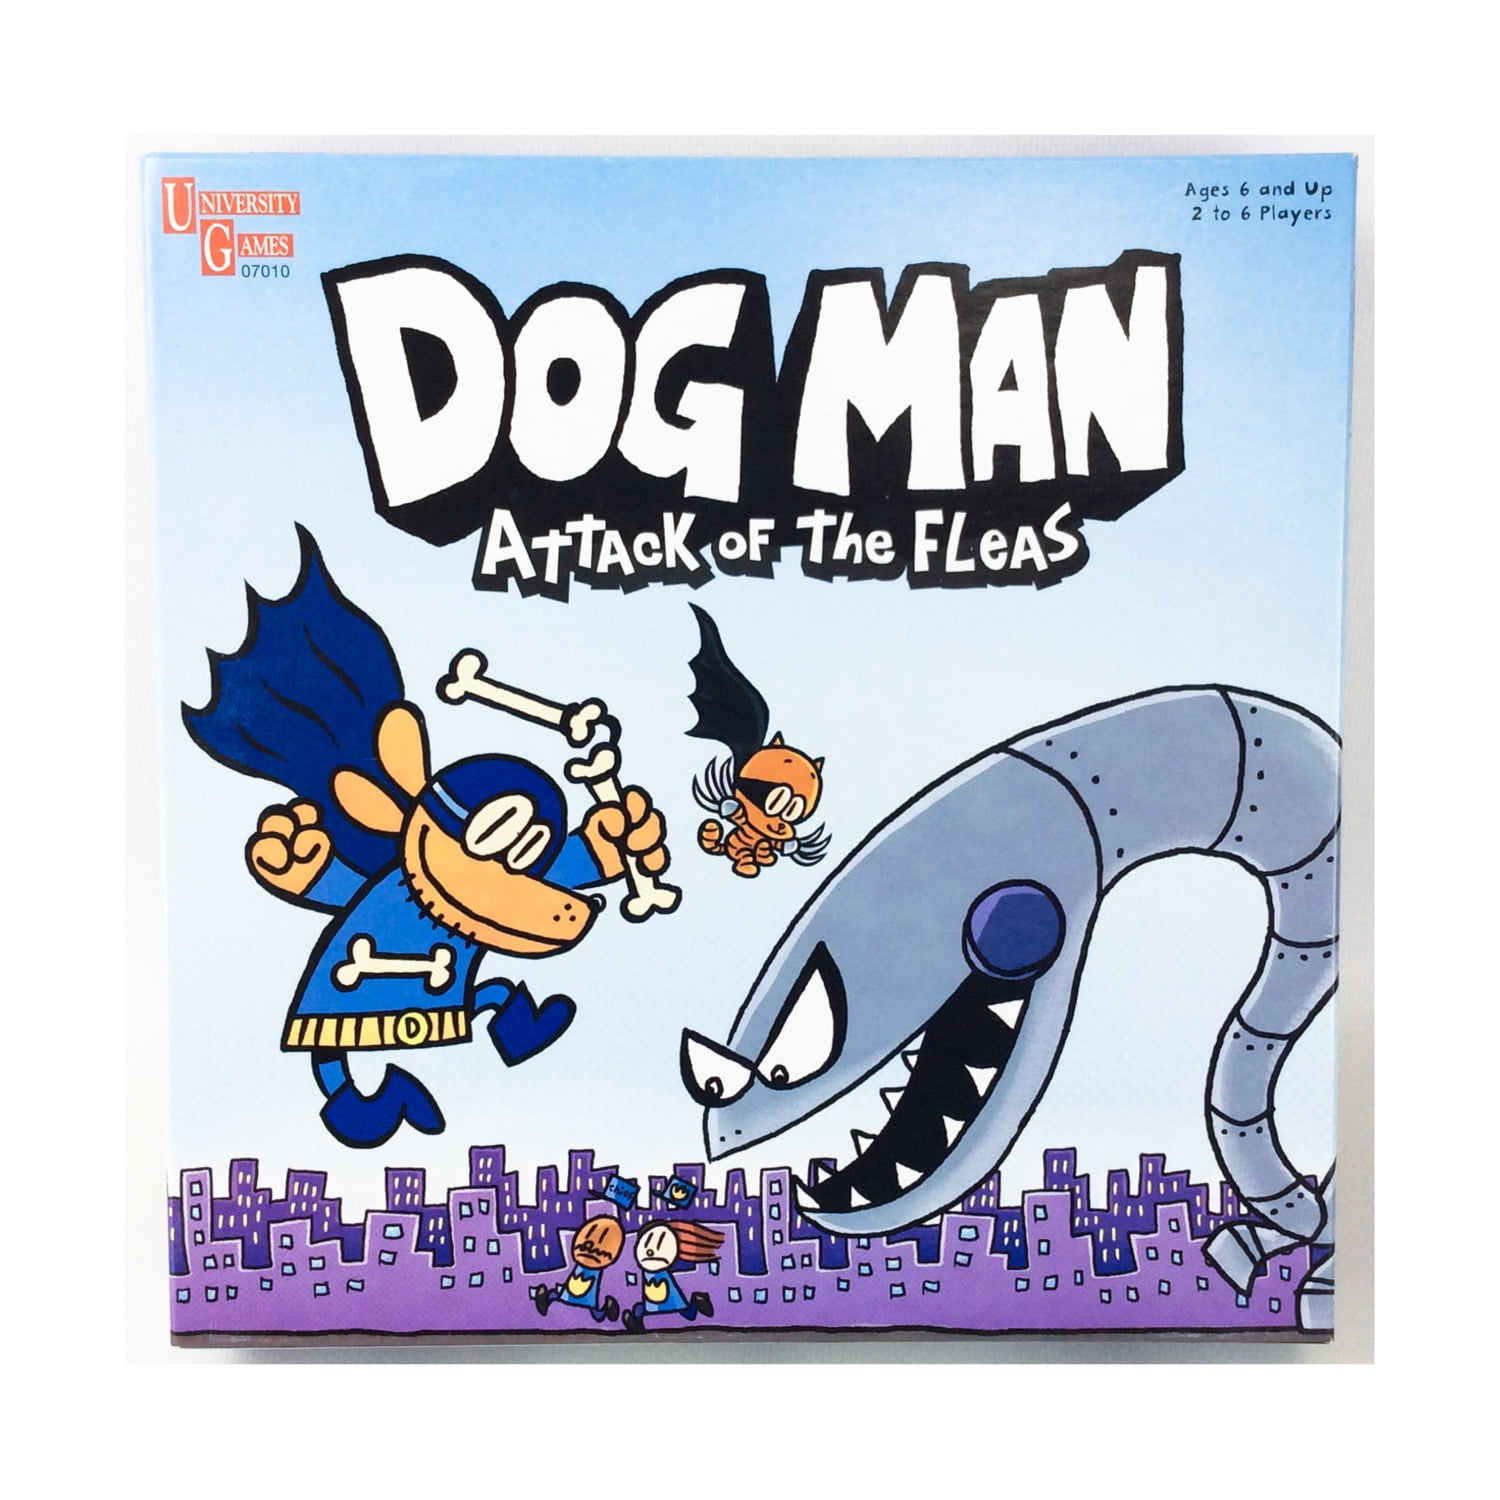 Dog Man' graphic novel by Dav Pilkey will entertain young readers